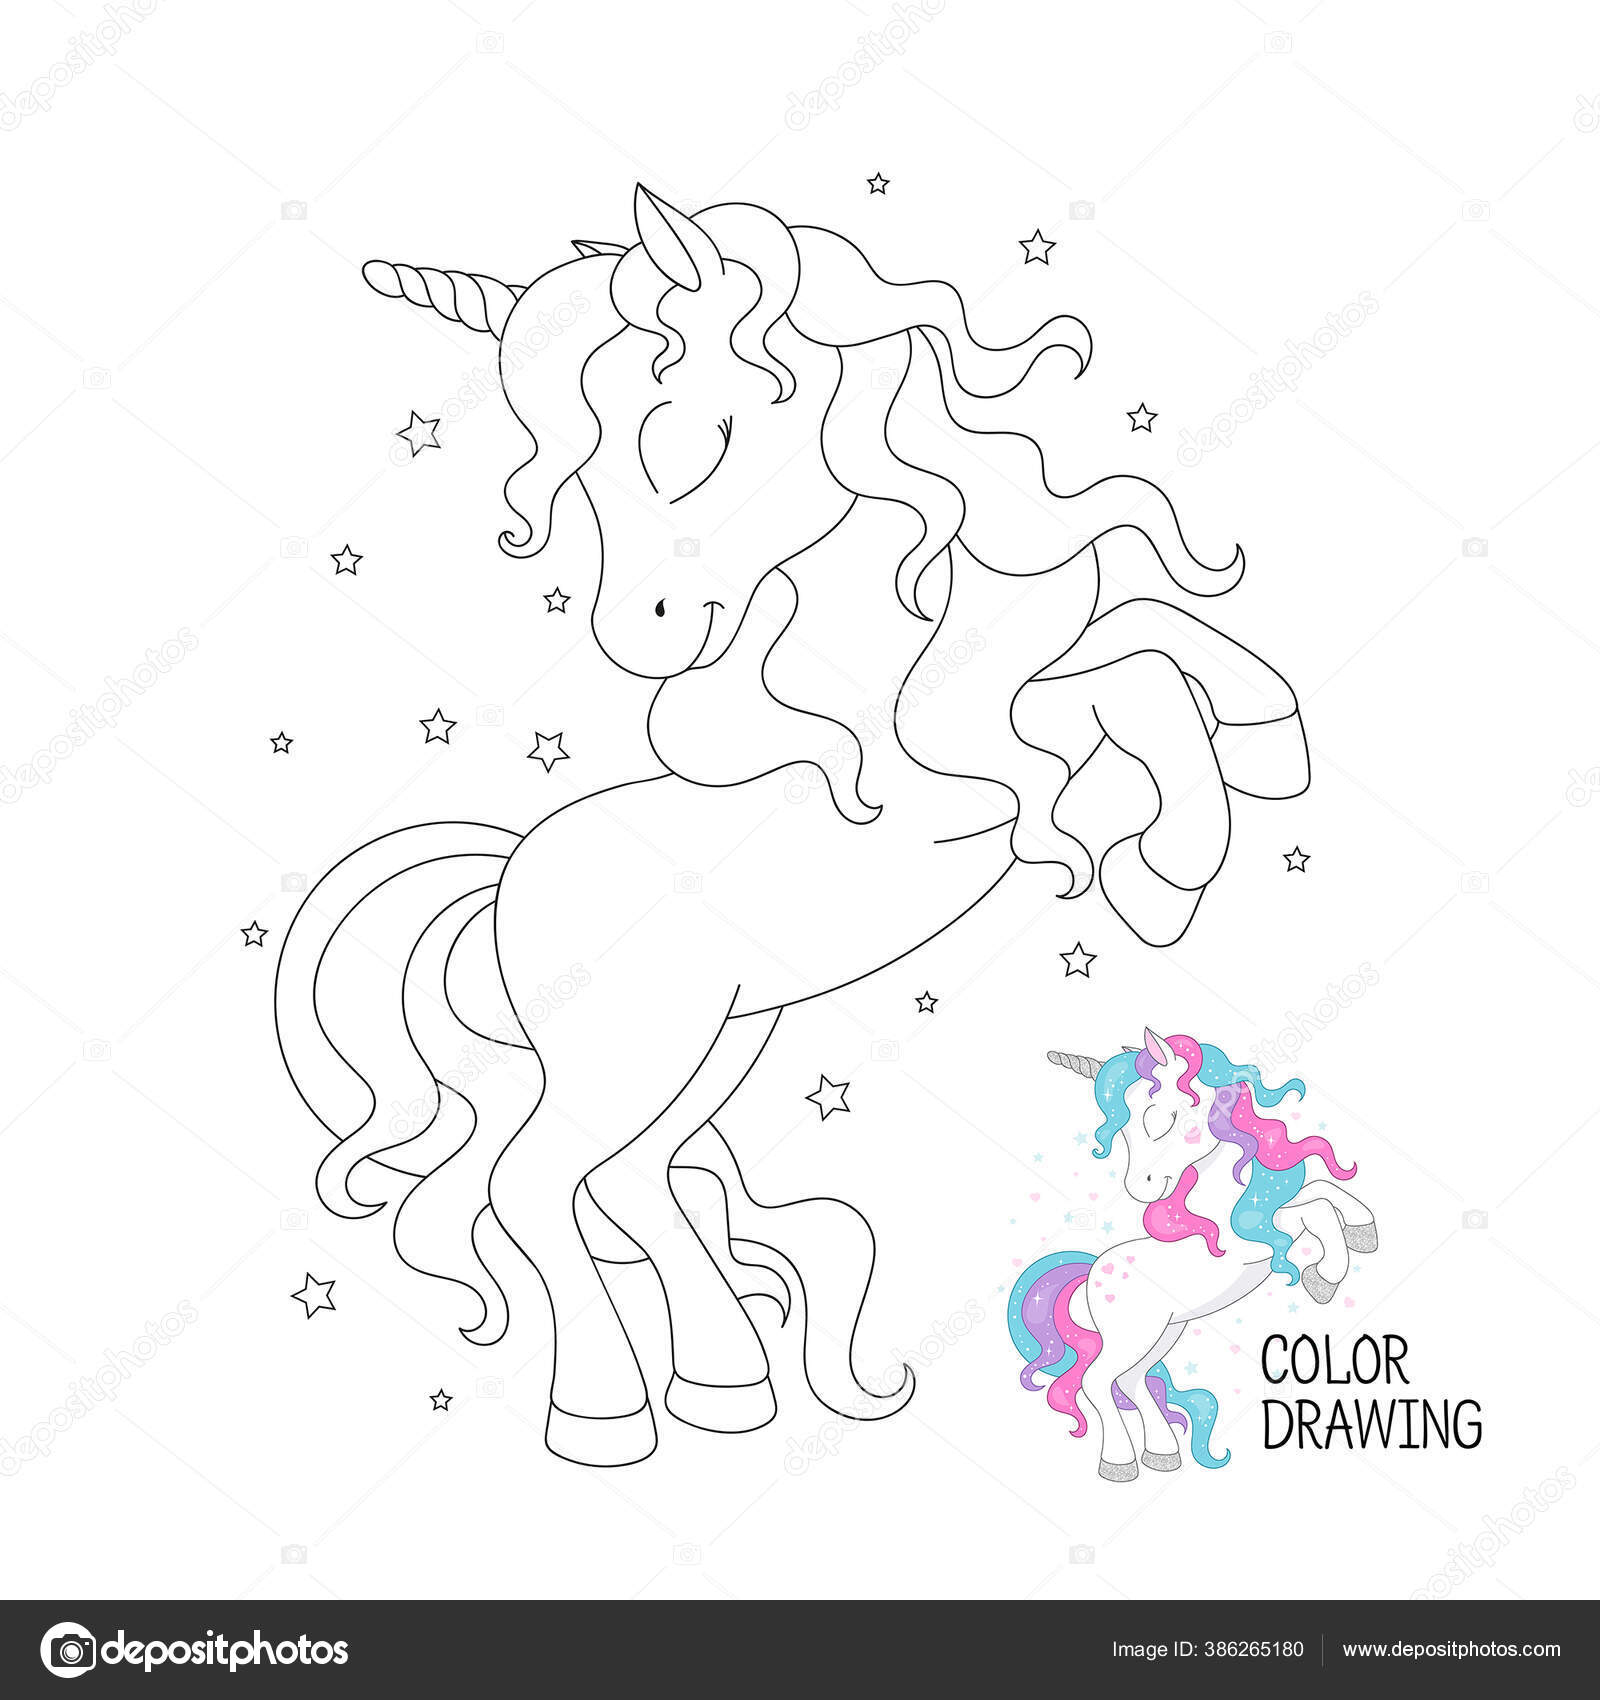 How To Draw A Unicorn For Kids : Cooper, Paige: Amazon.in: Books